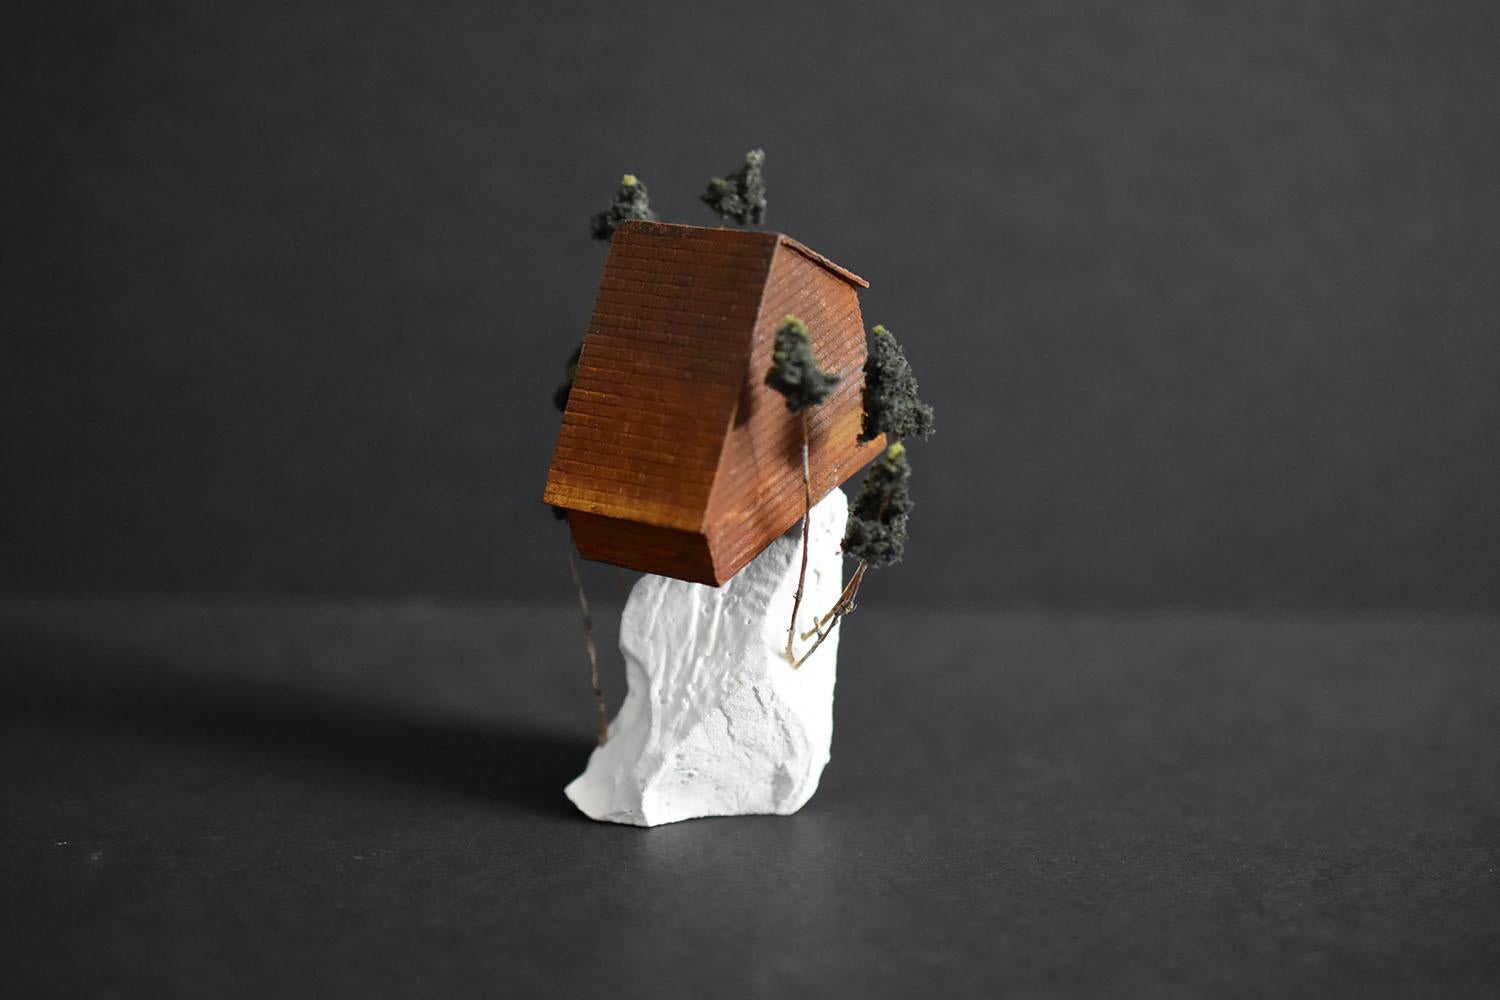 “Between pines, a pause” by Tatiana Flis is a 3.5 x 2 x 2 inch miniature landscape sculpture of reclaimed wood, plastic, and found mixed-media and organic materials. An orange and rust colored salt-box style home sits on top of a white landscape